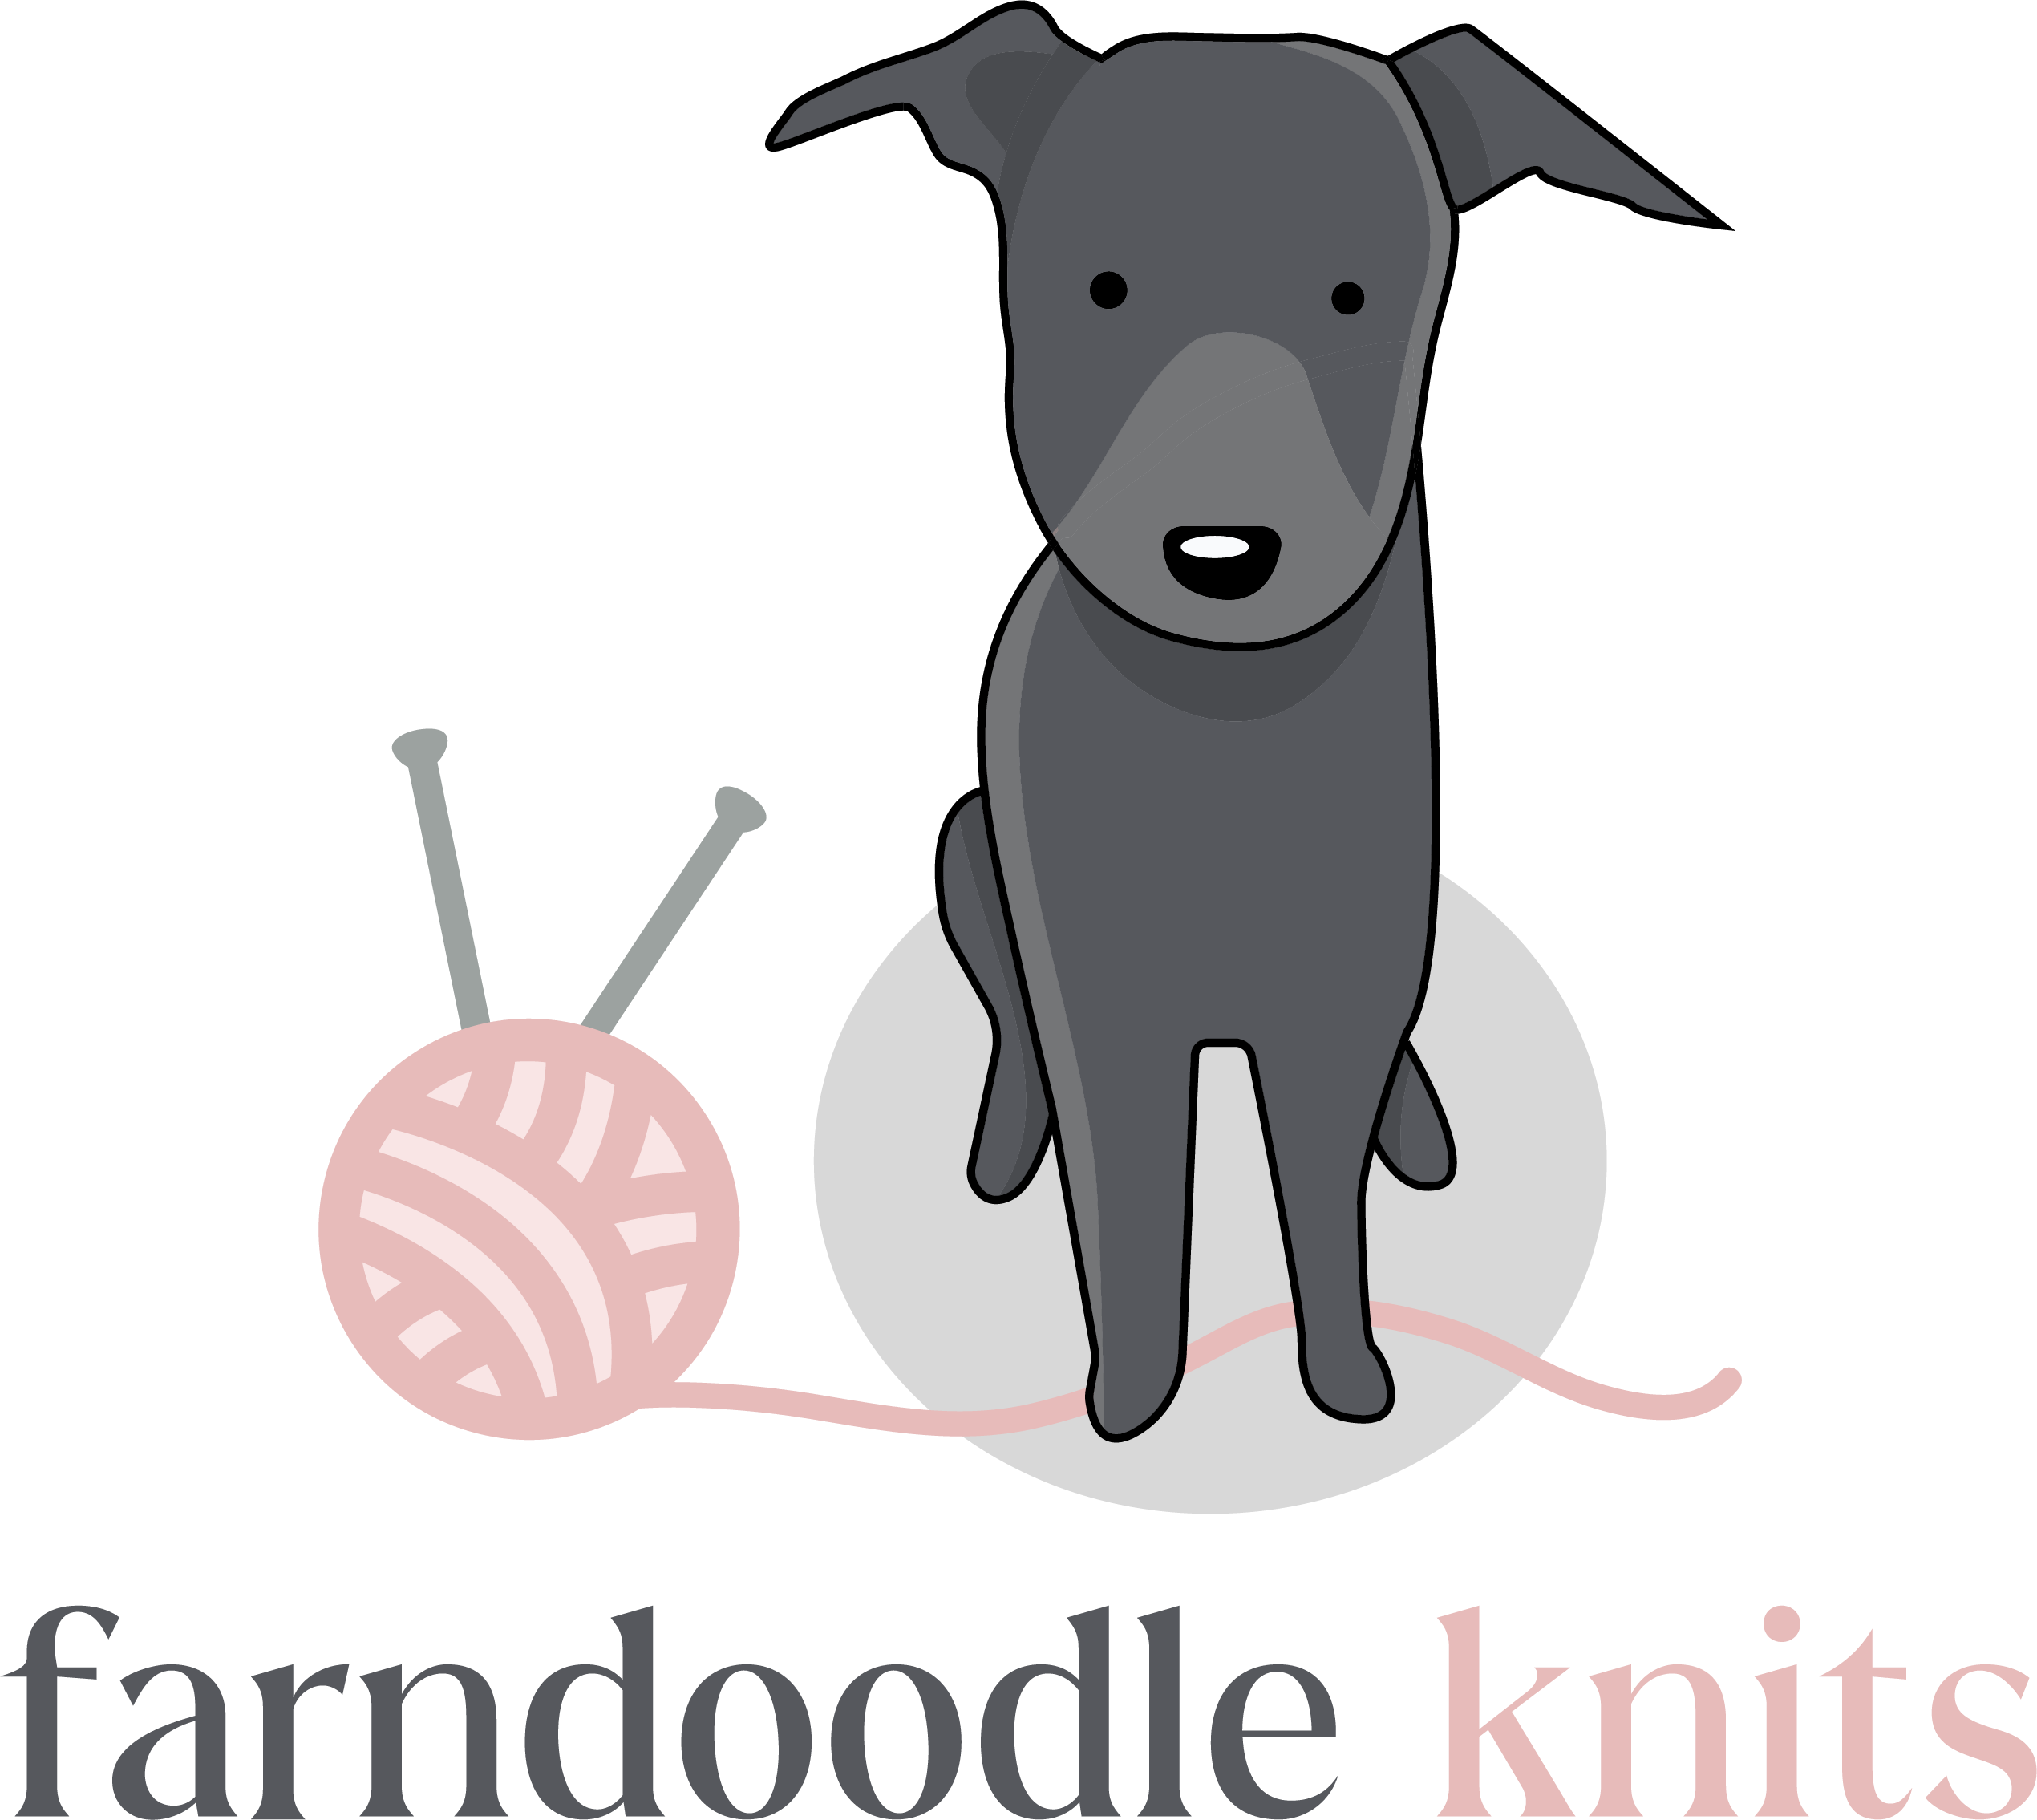 farndoodle knits